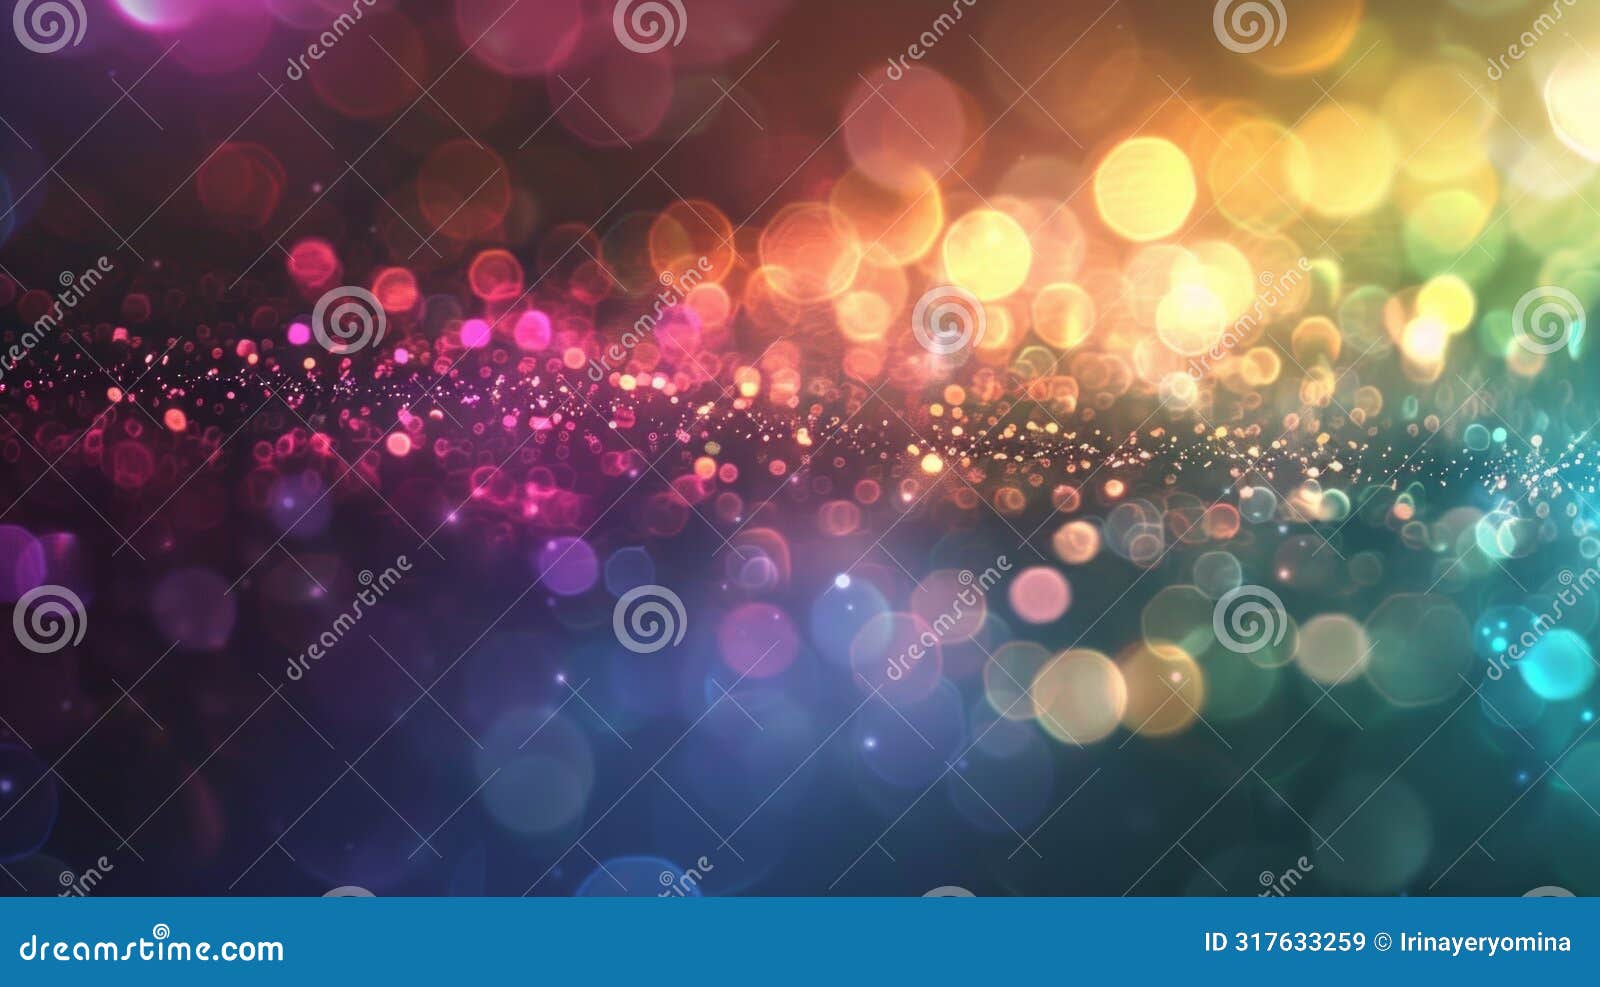 magical light dispersion texture background